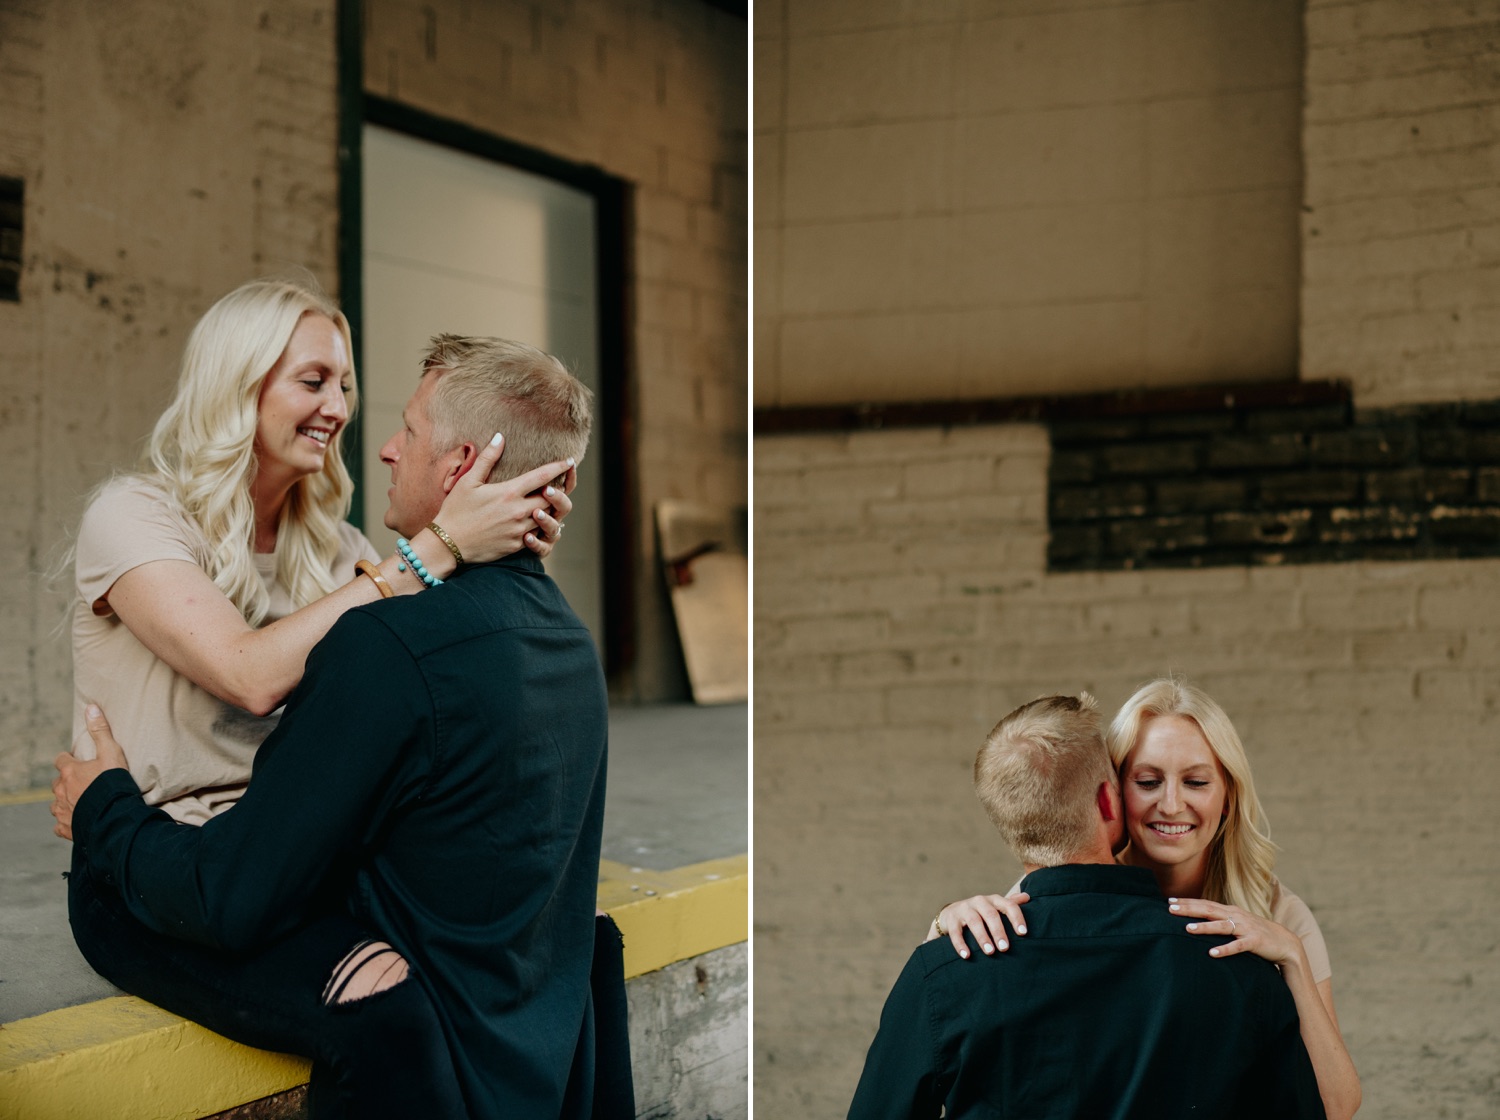 Urban engagement session warehouse district Minneapolis on a loading dock